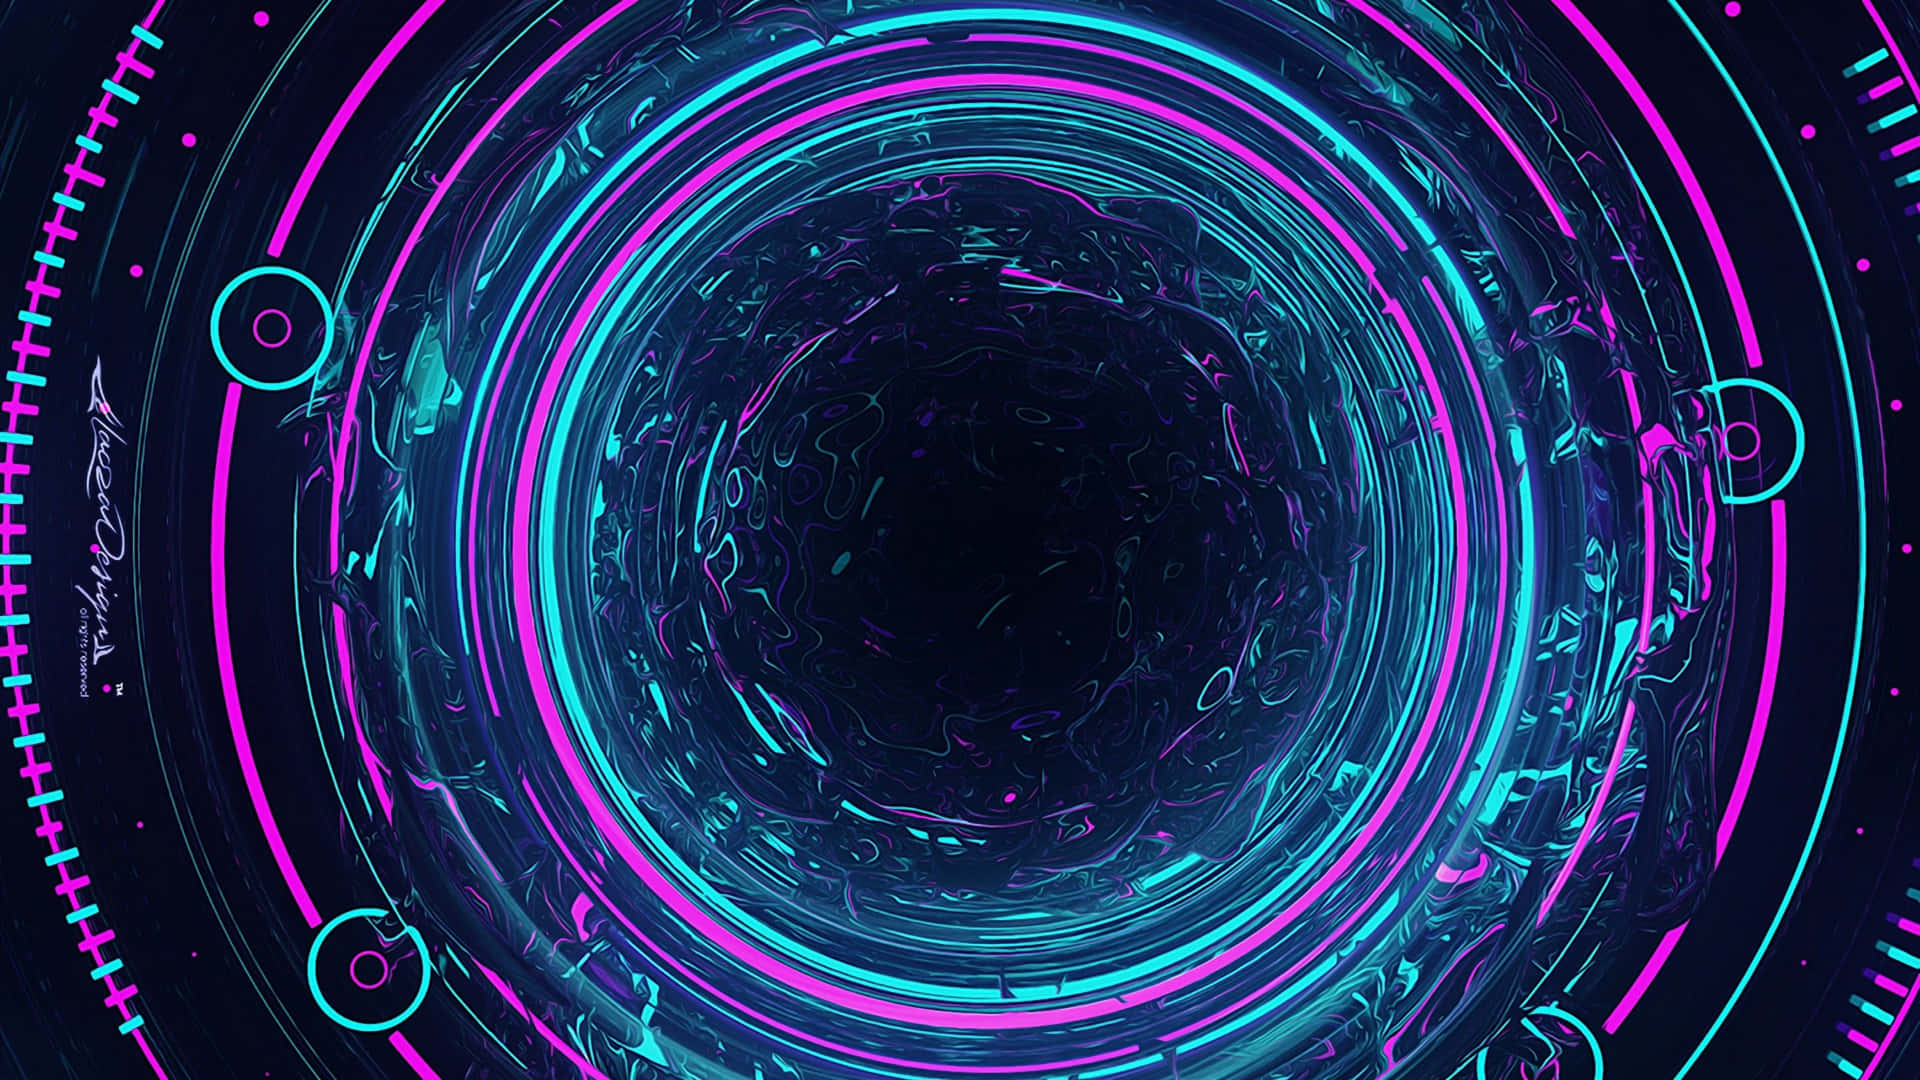 A Circular Neon Light Tunnel With Blue And Purple Lights